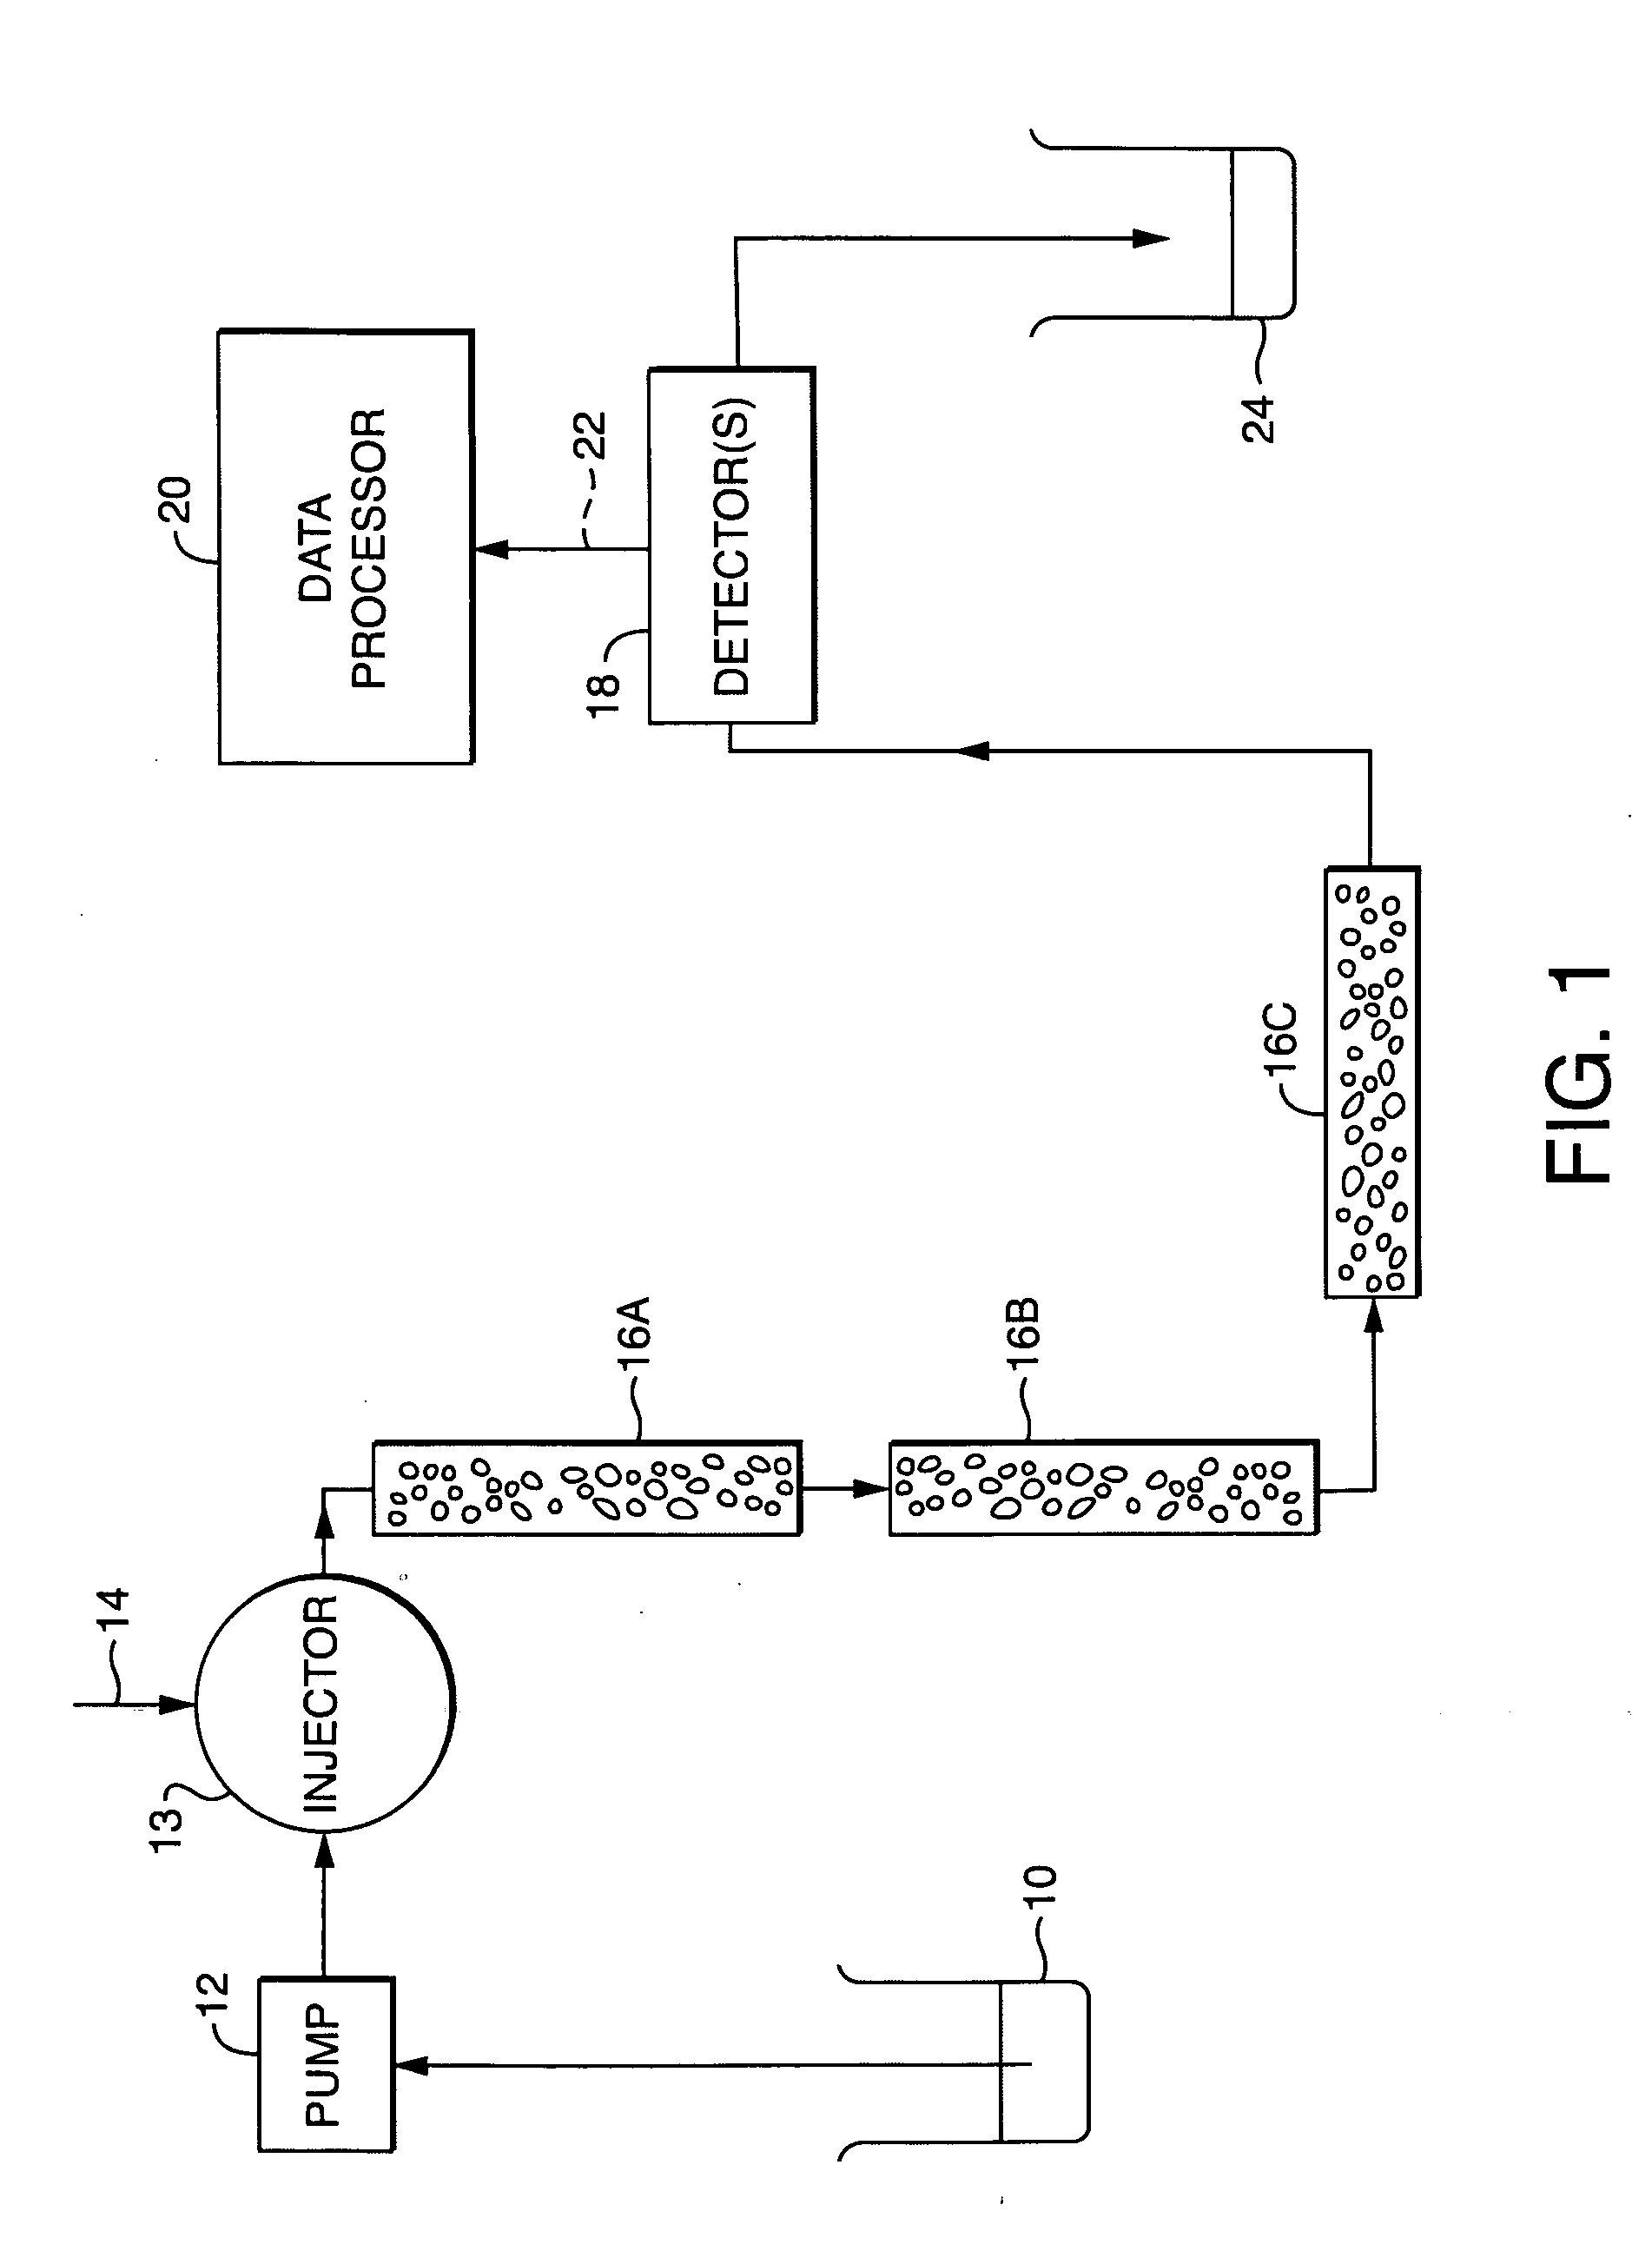 System and method for determining radius of gyration, molecular weight, and intrinsic viscosity of a polymeric distribution using gel permeation chromatography and light scattering detection